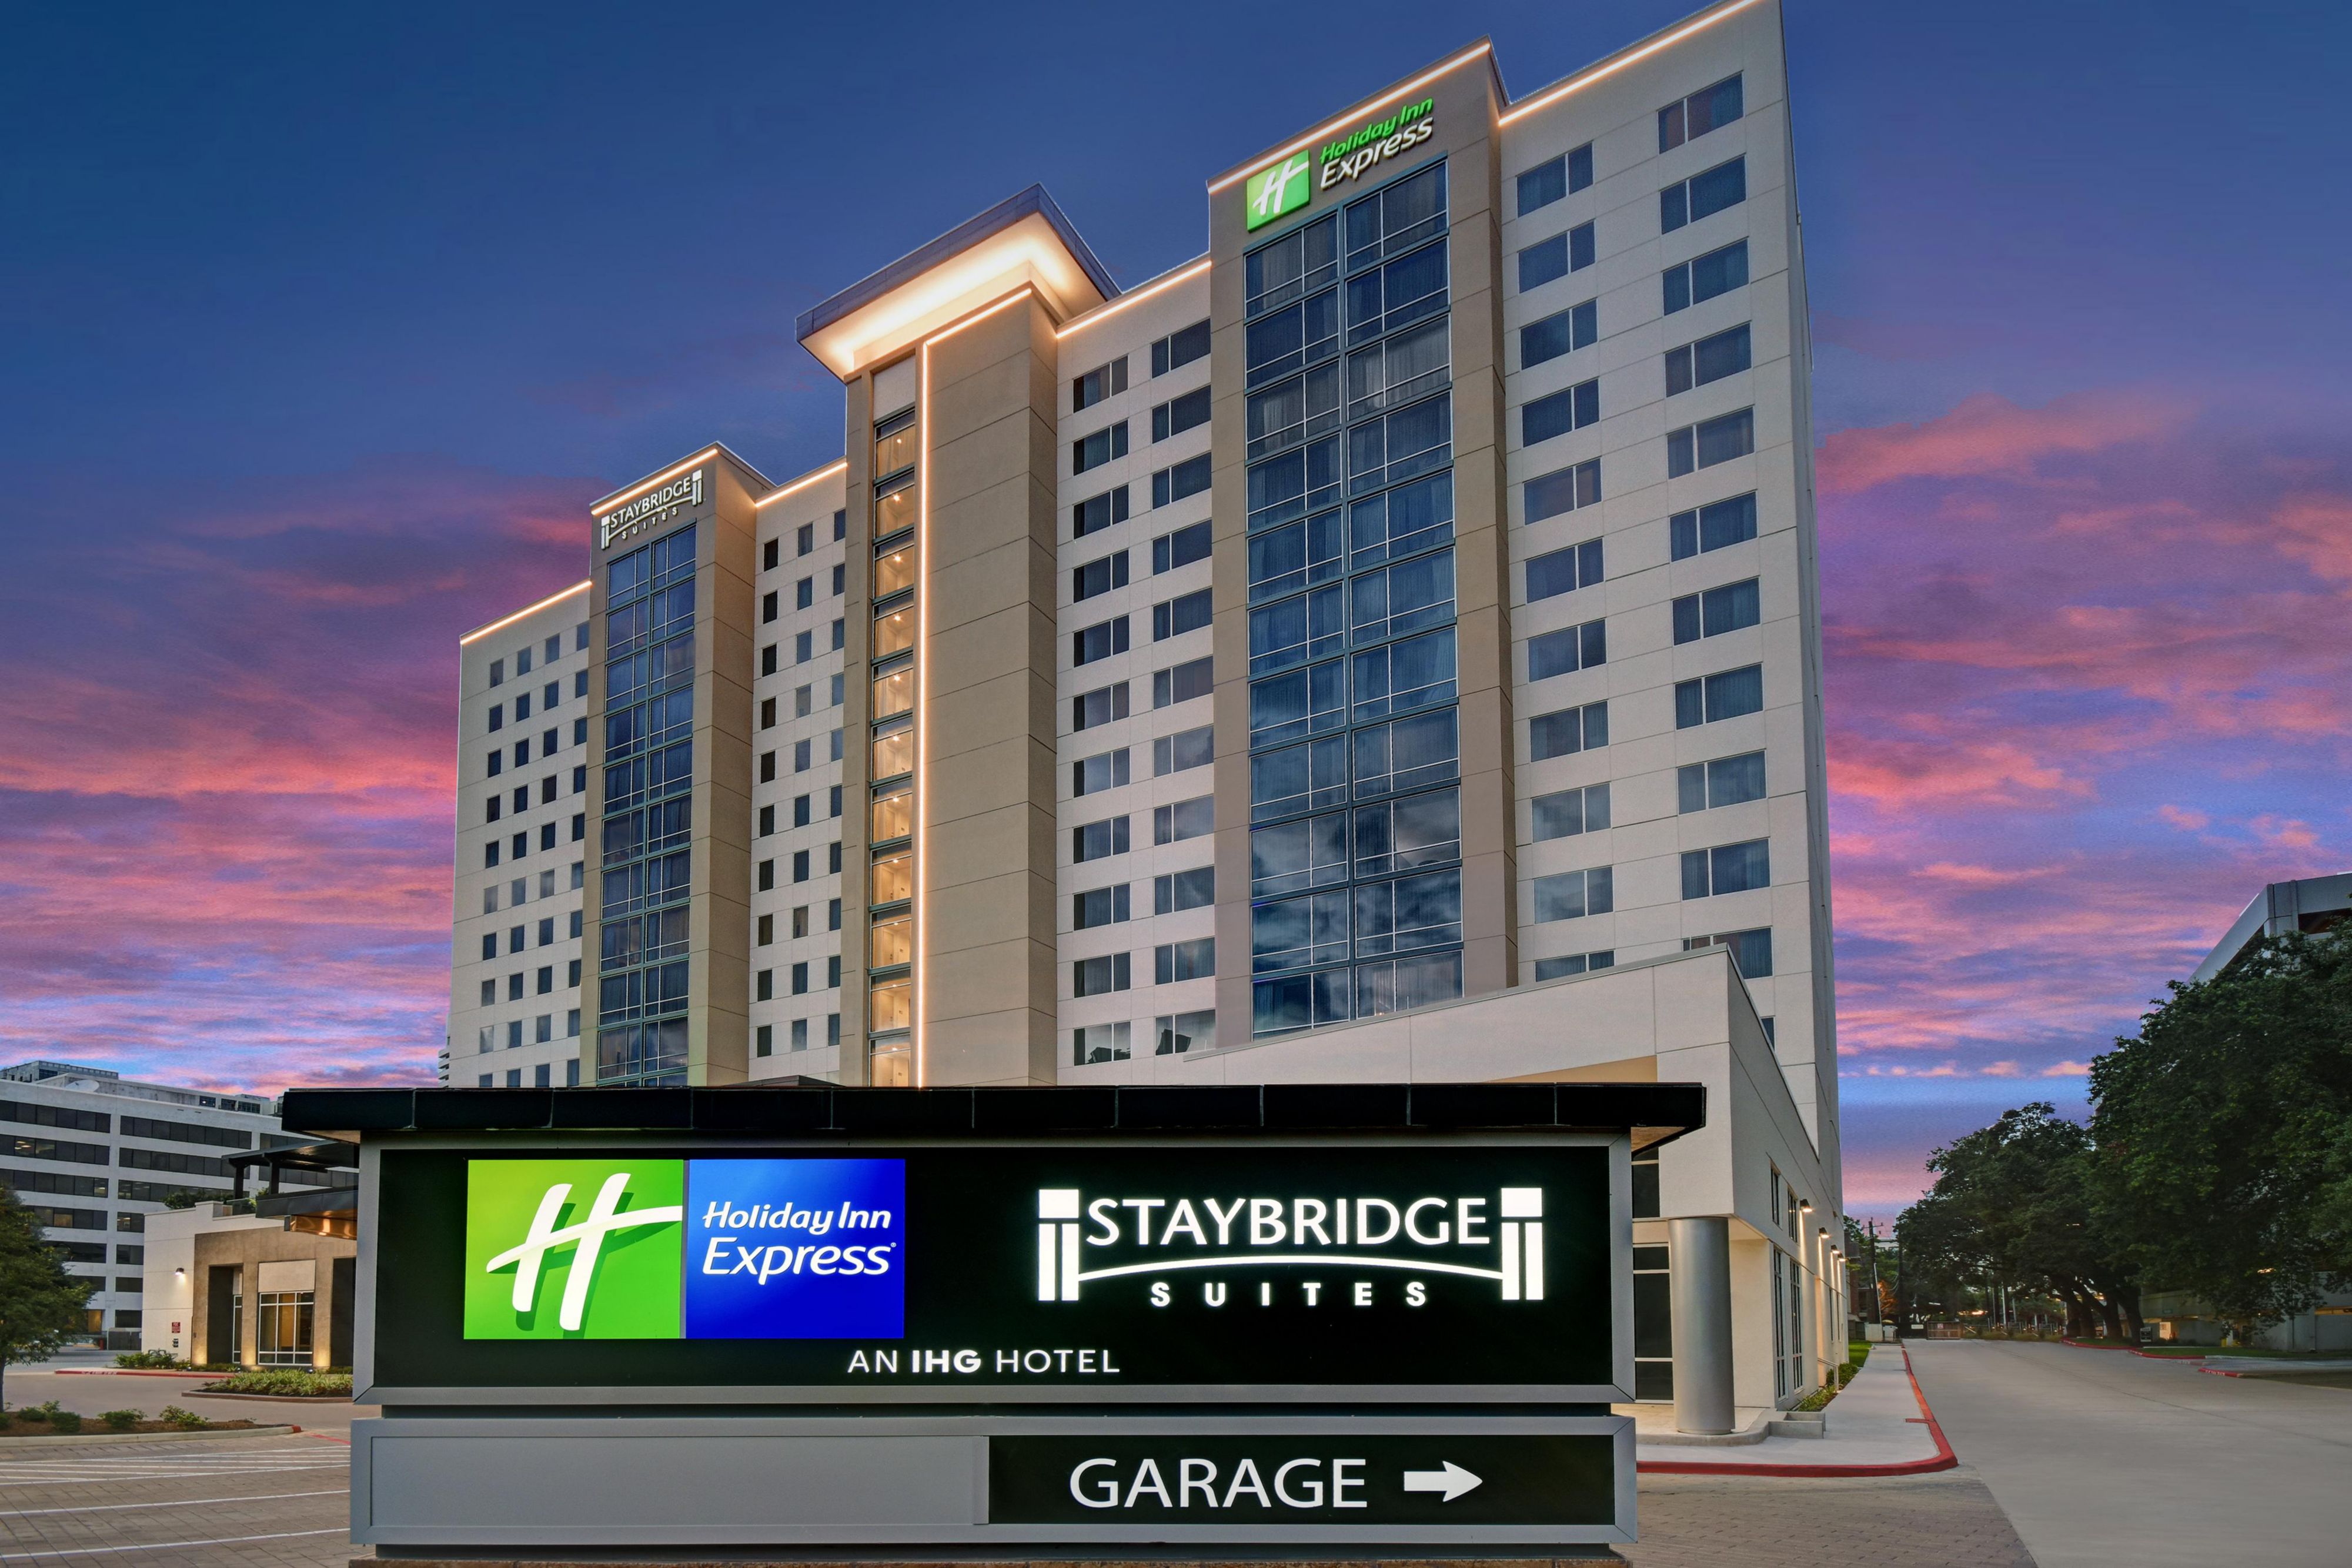 Welcome to the brand-new Dual brand Staybridge Suites and Holiday Inn Express Houston-Galleria Area! You’ll find comfort and modern luxury at one of the most prominent locations in Houston-Uptown and the Galleria area all under one roof!